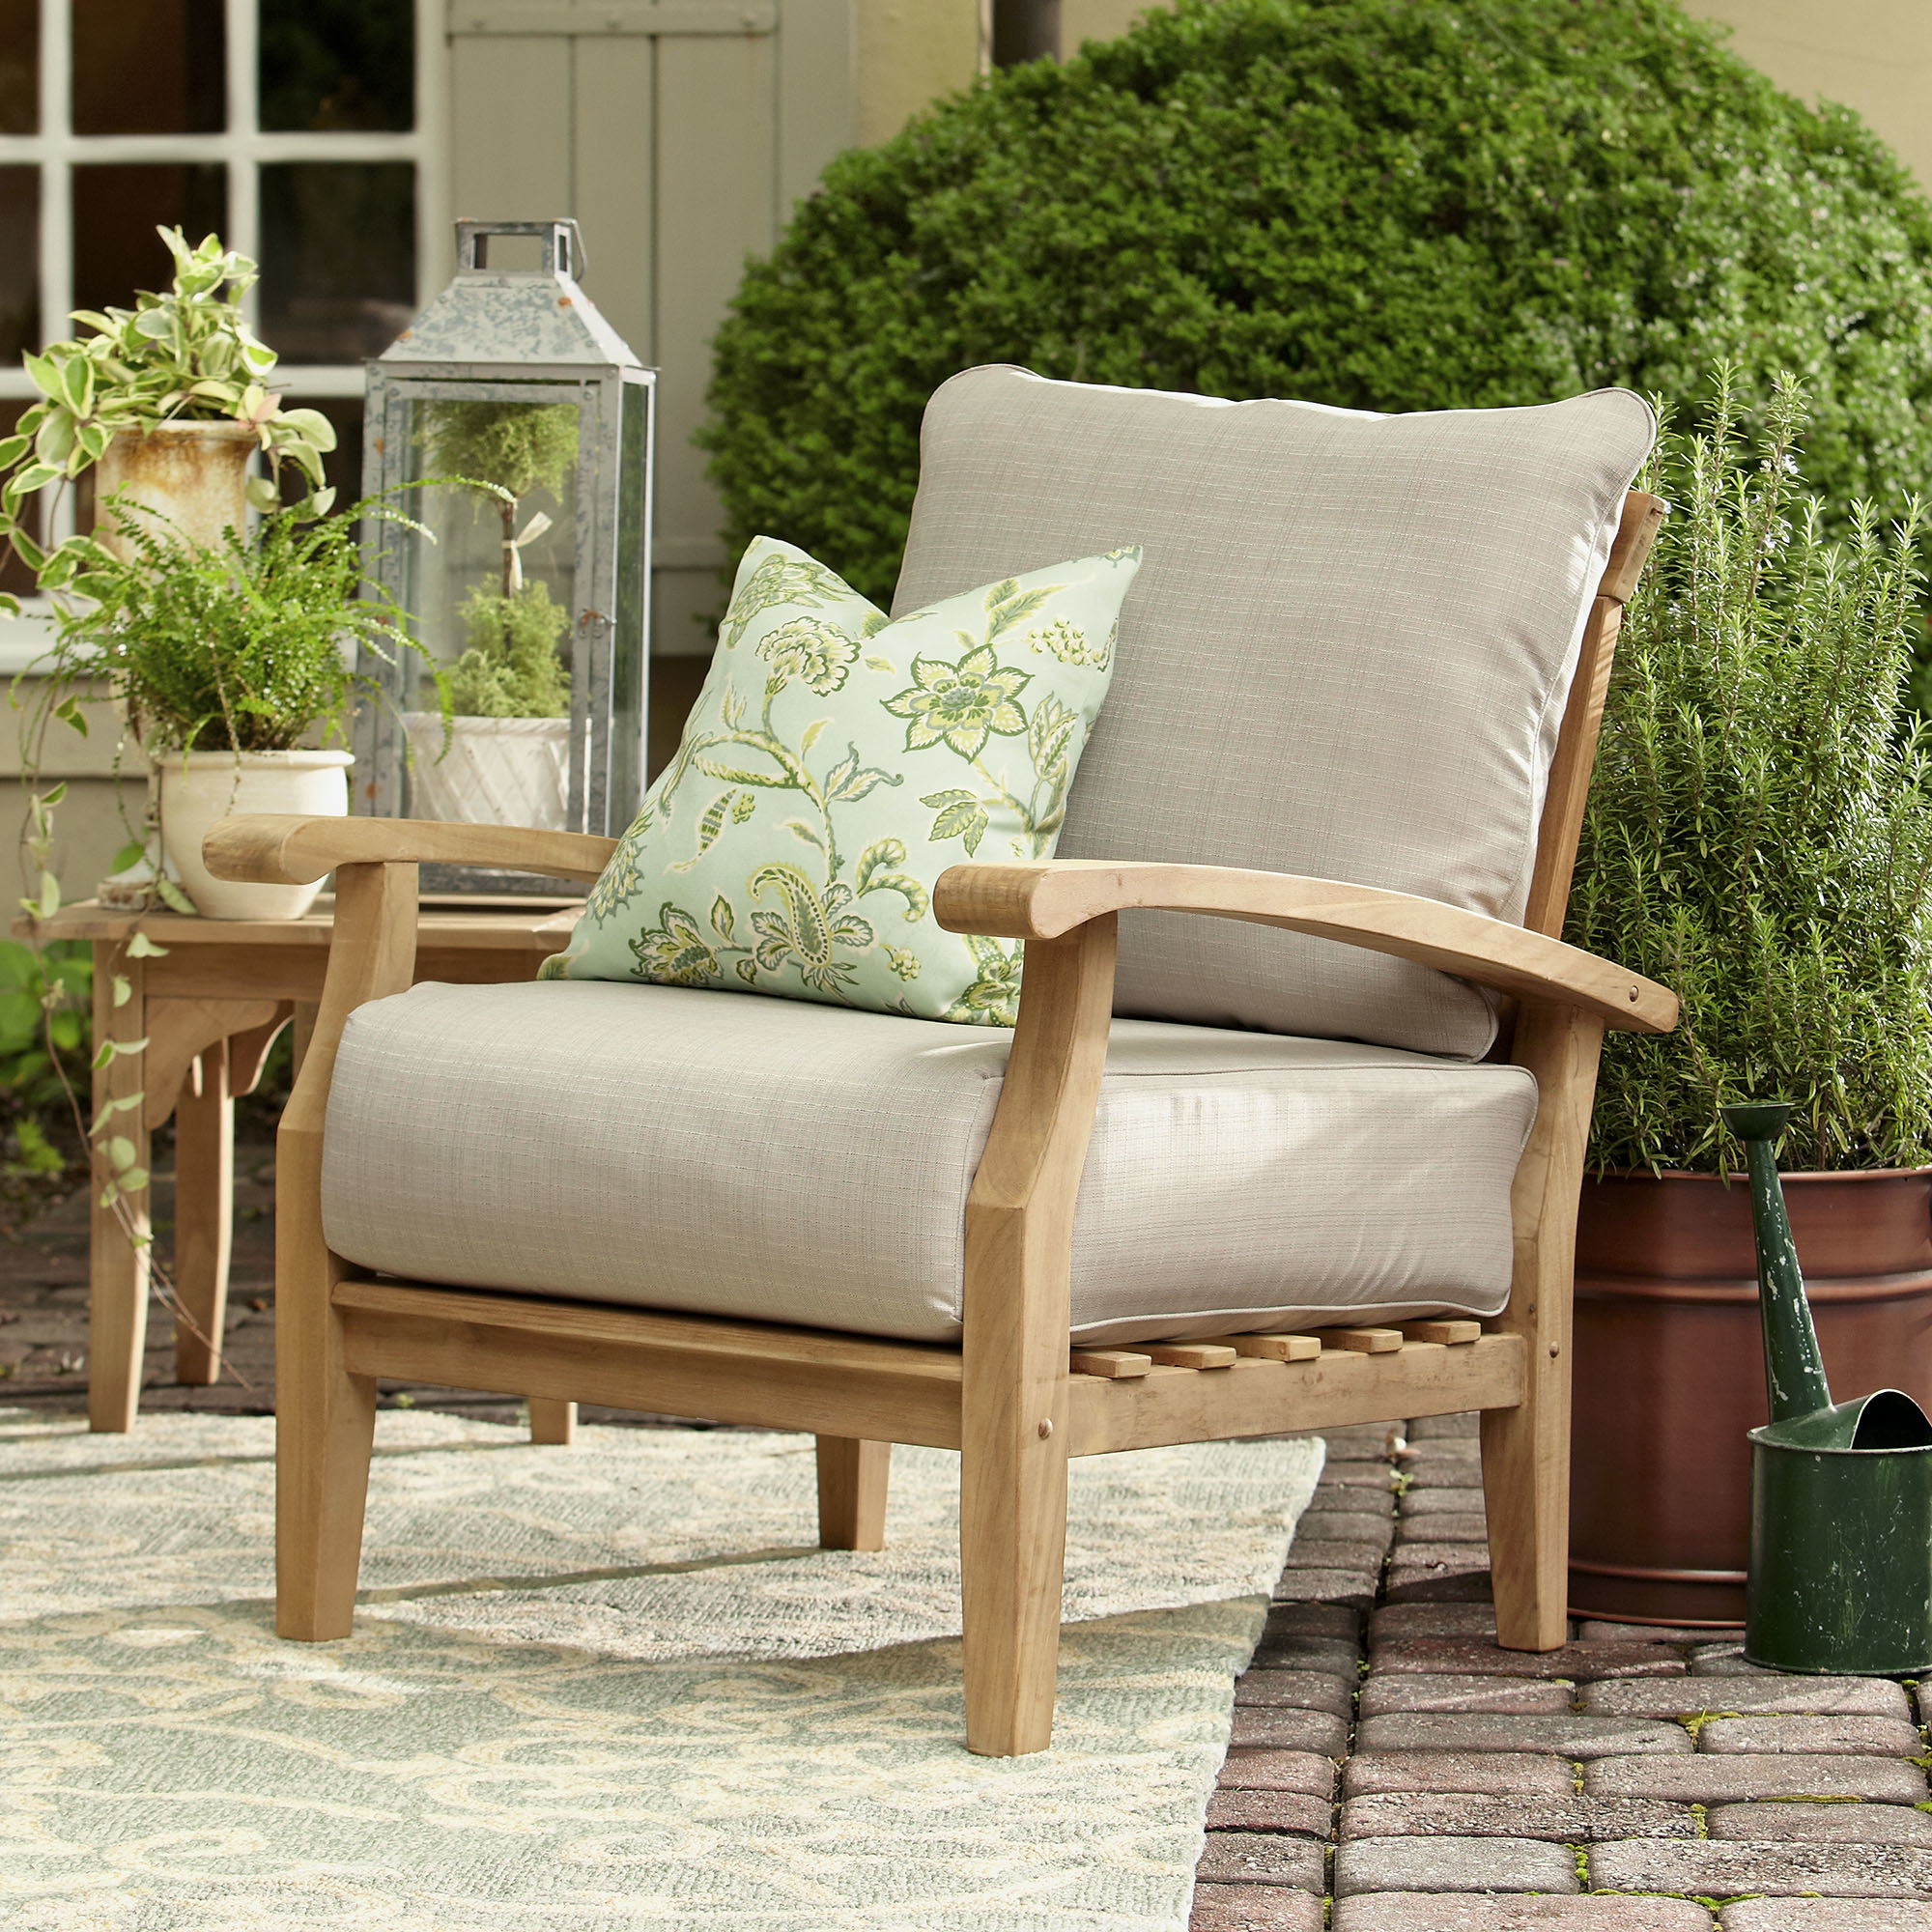 Best Teak Patio Furniture For Your Outdoor Space